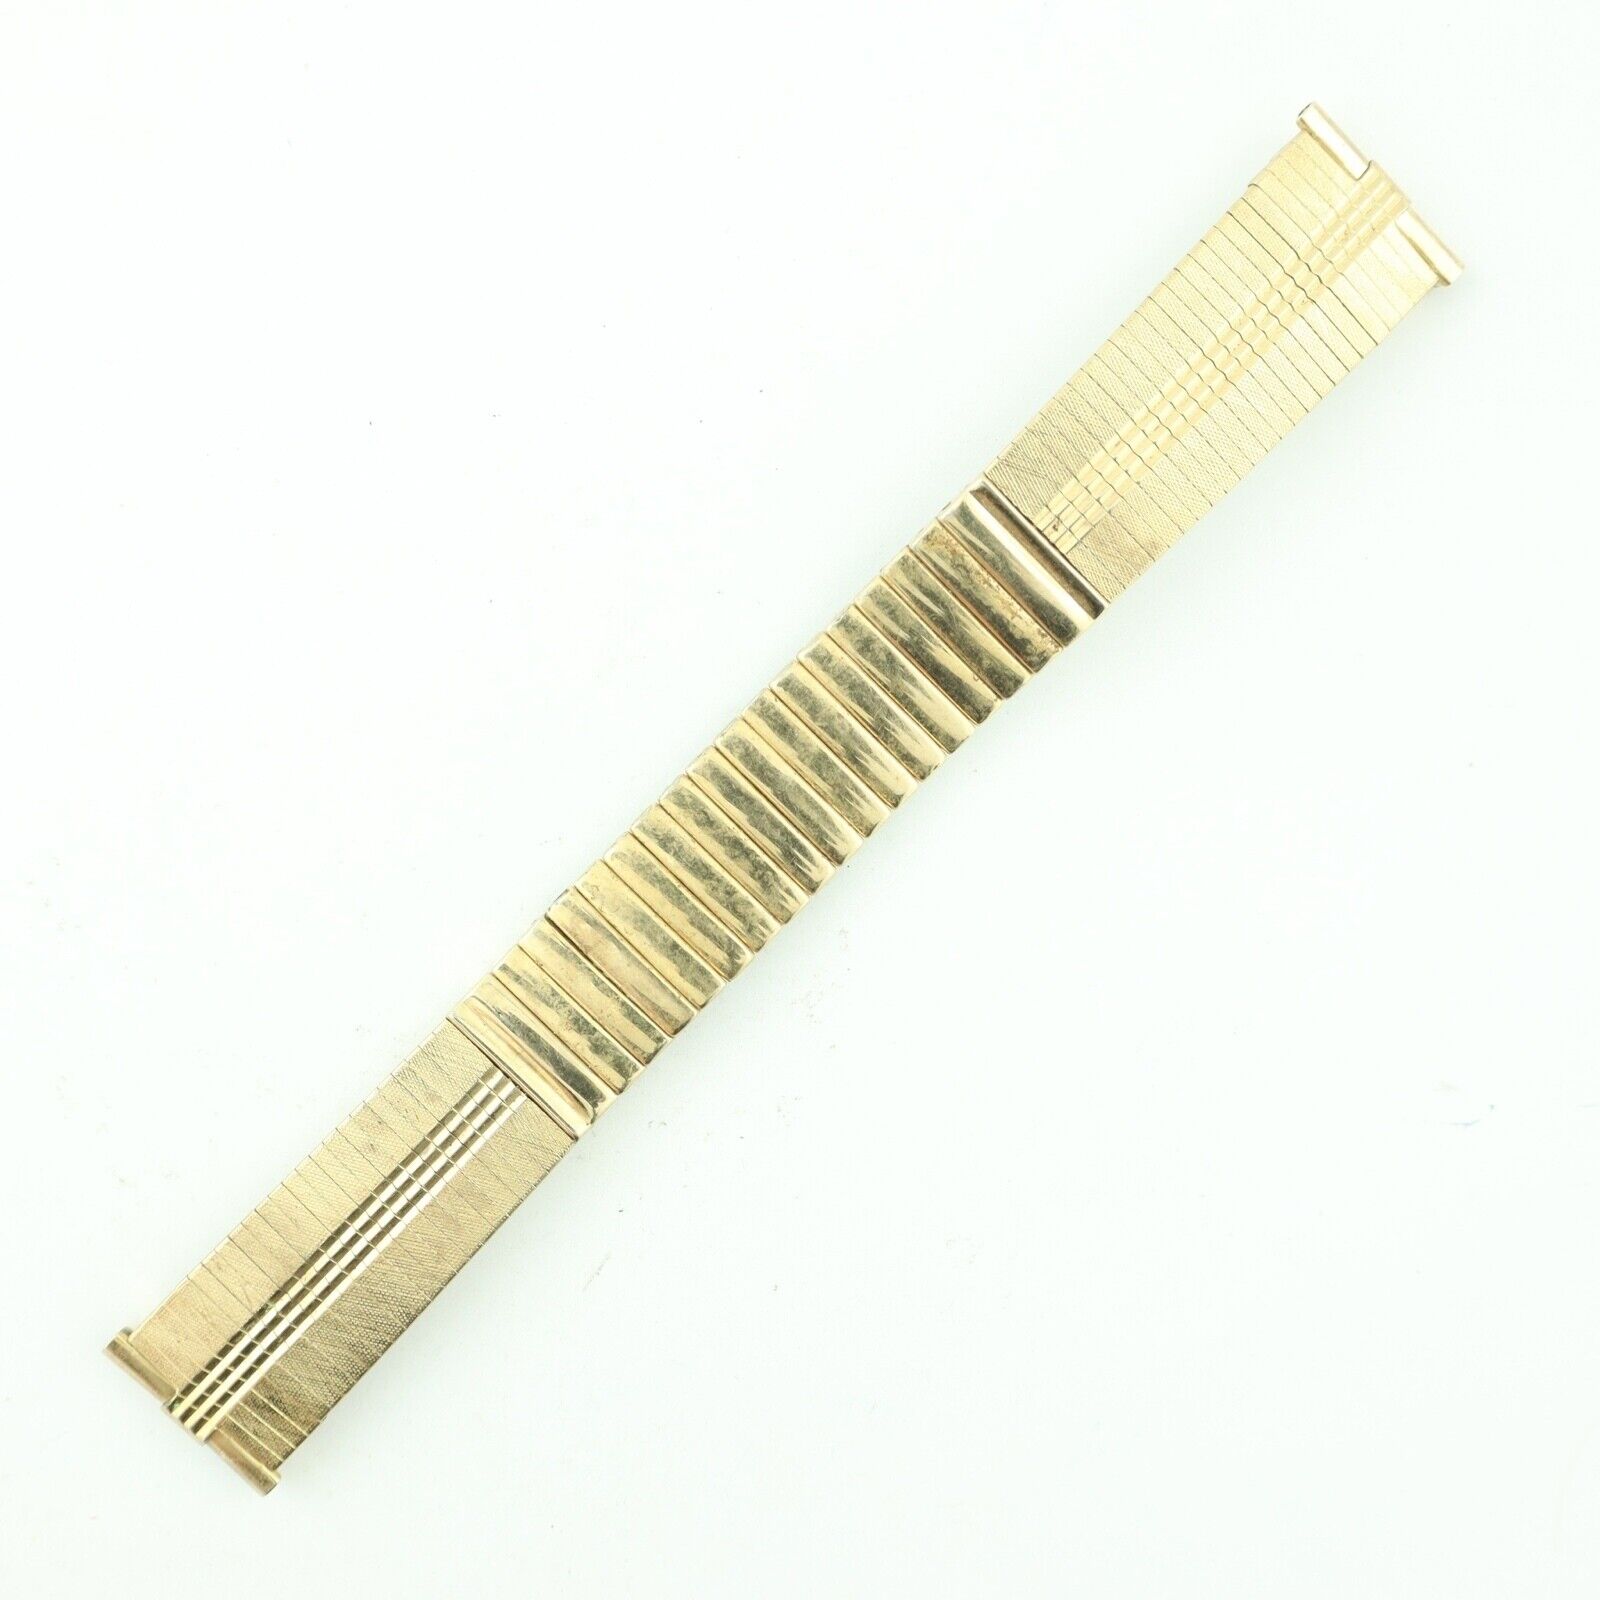 Vintage 17.5mm to 19mm JB / Jewelers Best Men's Wristwatch Band Gold Tone